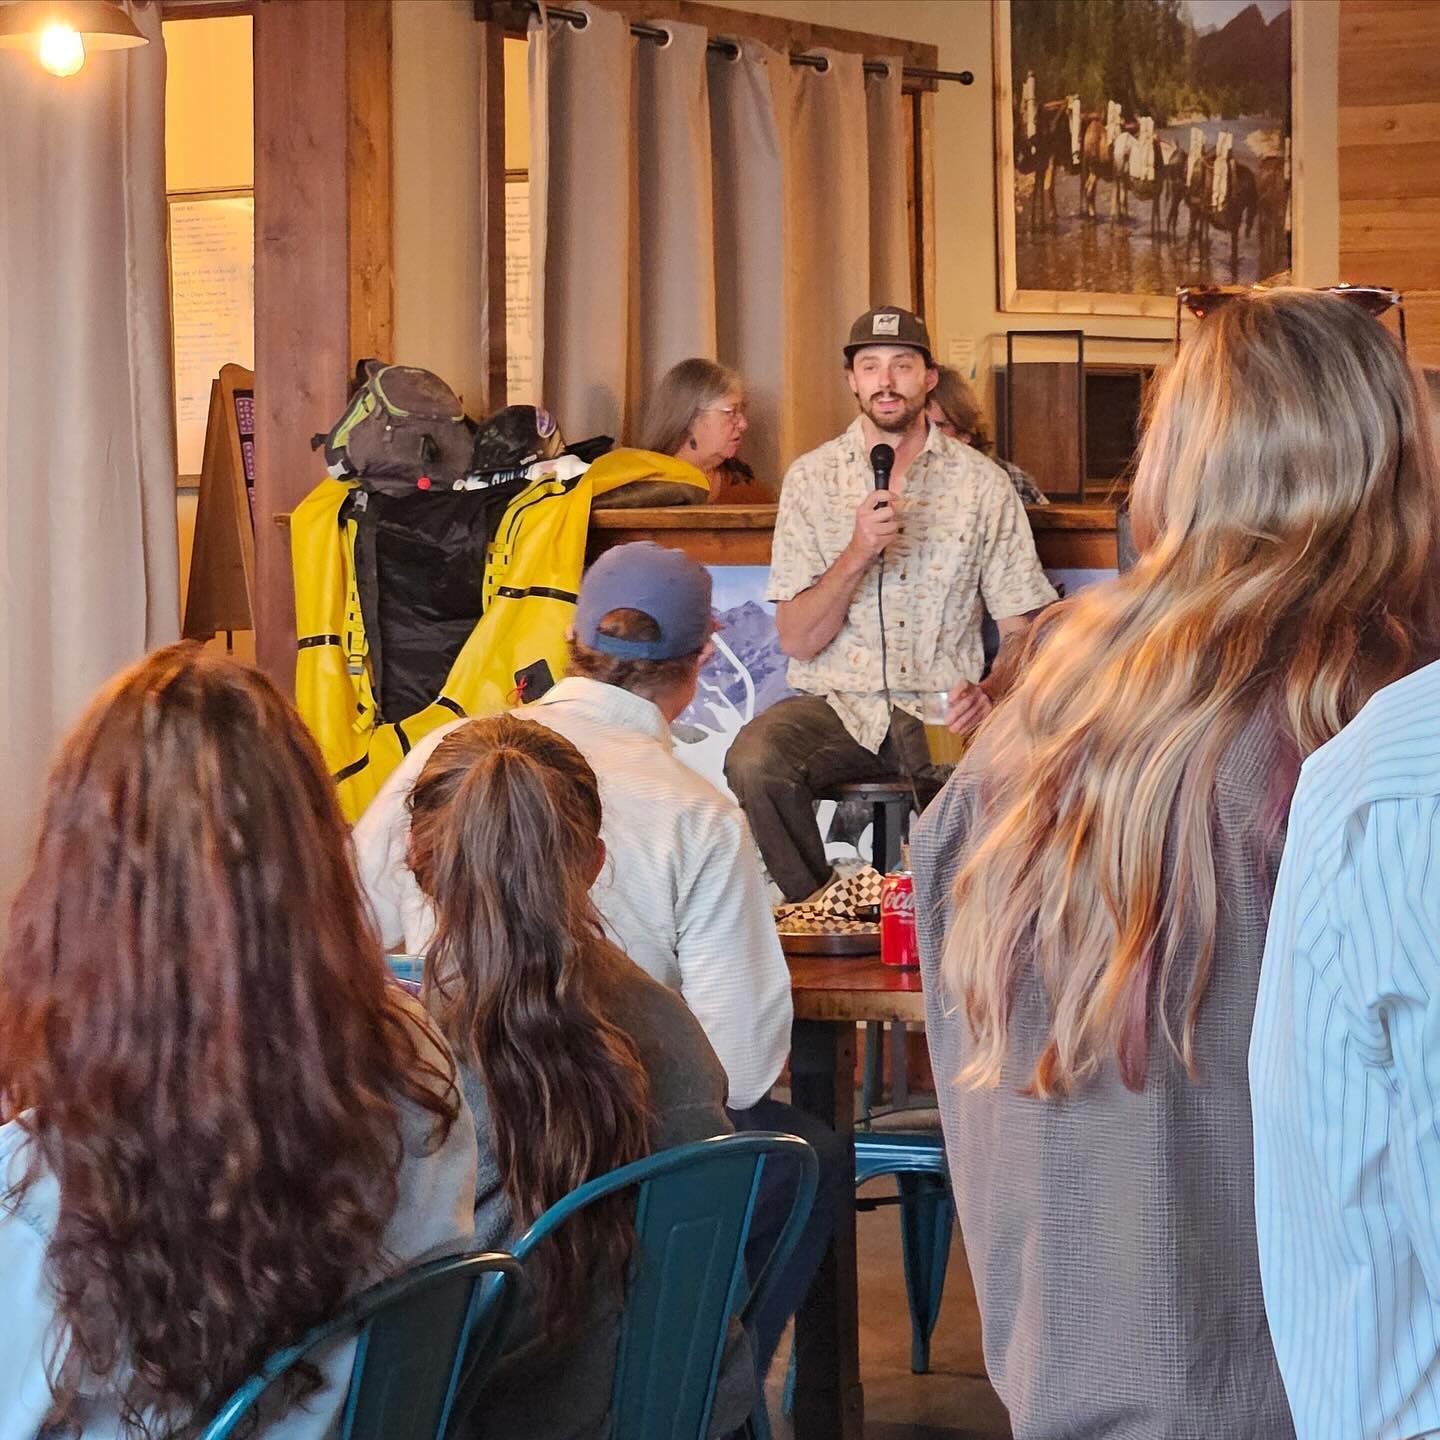 Whew, it&rsquo;s been a busy week! Thanks so much to everyone who came out to our events around town &ndash; whether you enjoyed hearing stories from Artist Wilderness Connection residencies at Wilderness Speaker Series last week, stopped by our boot